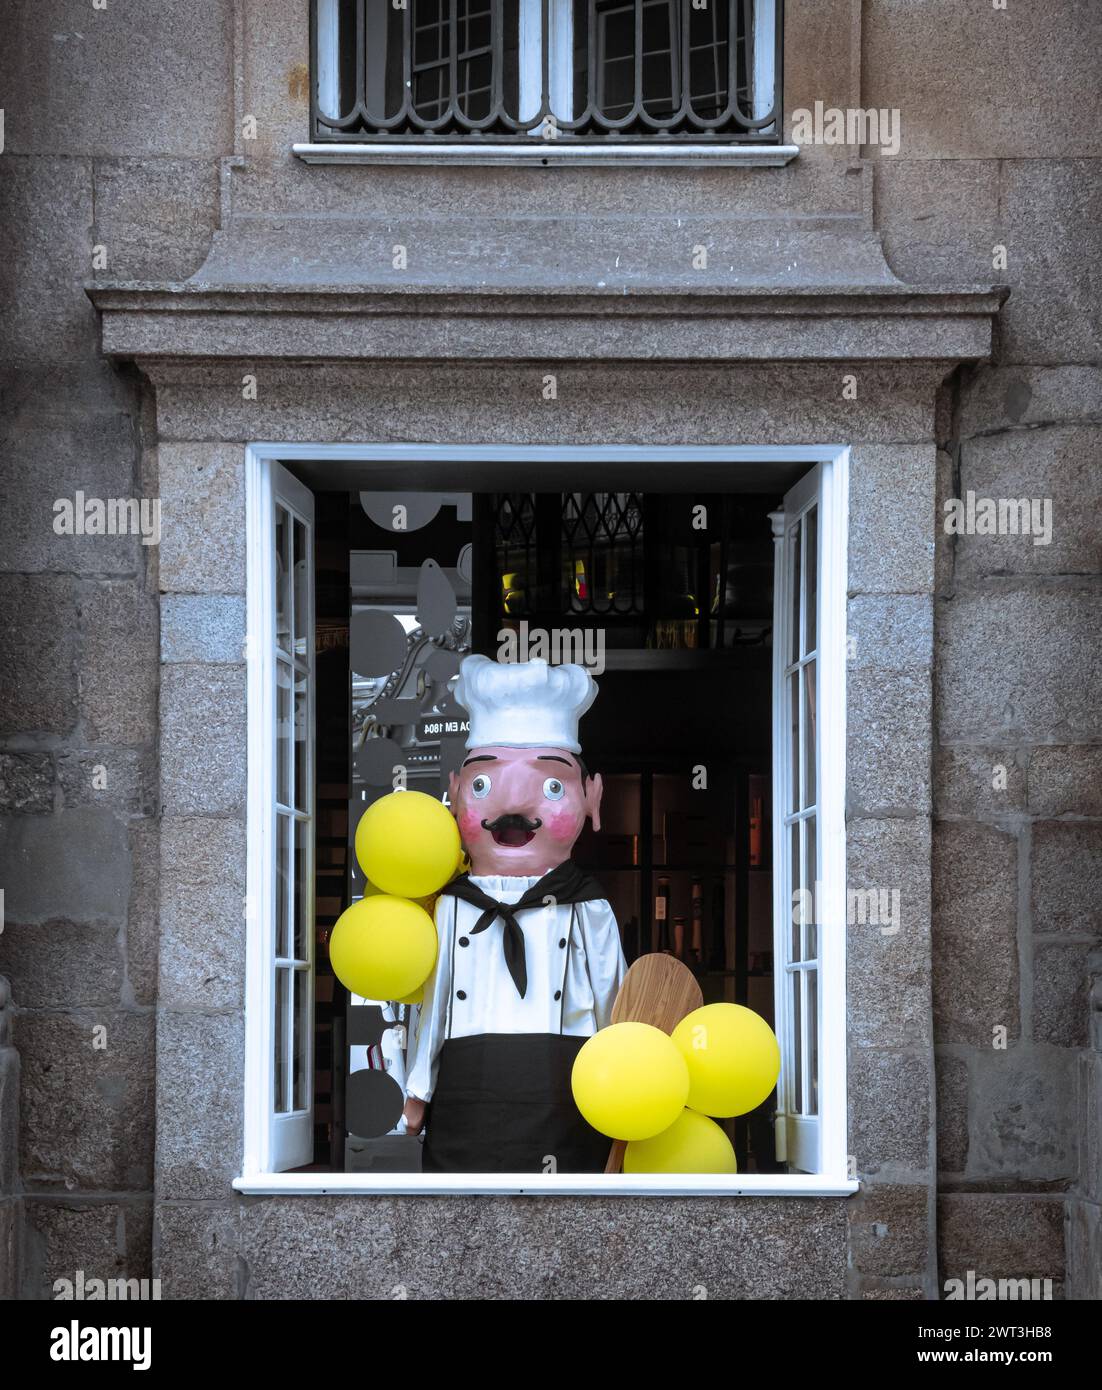 Life size puppet of traditional chef holding balloons in open large window in stone building Stock Photo